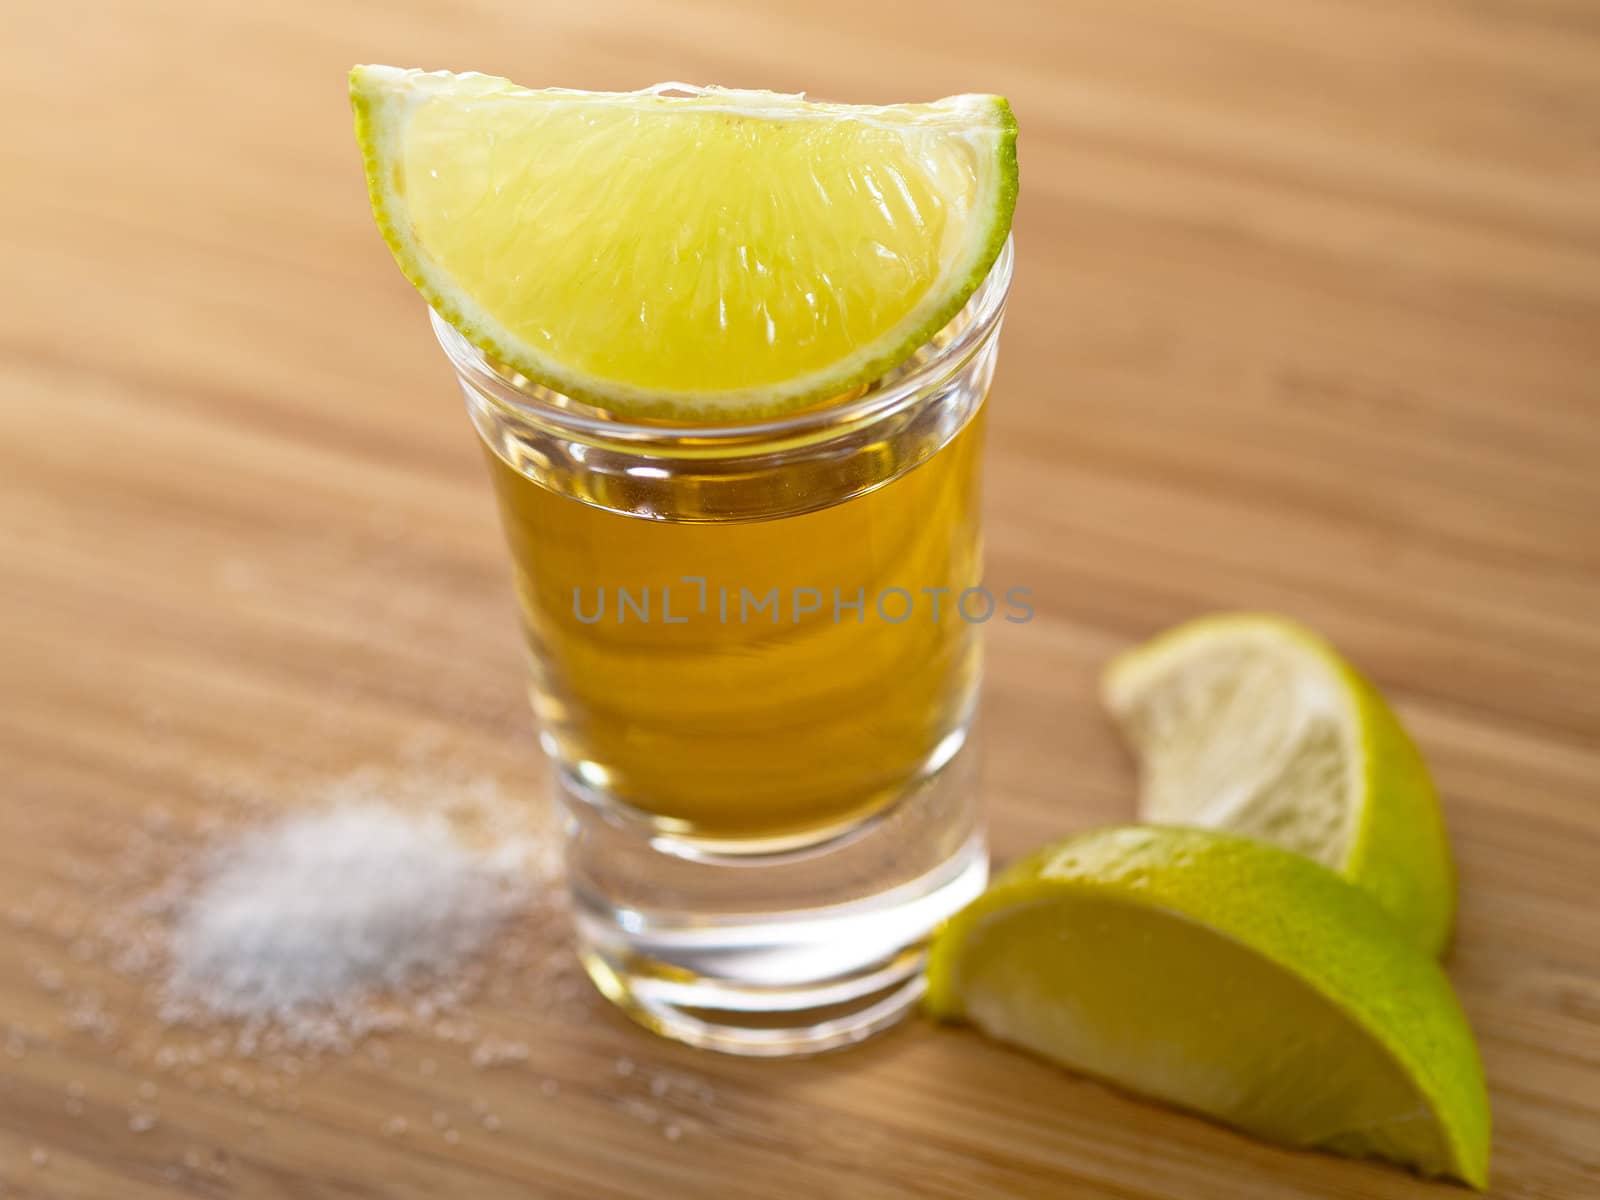 Shot of tequila with salt and lime